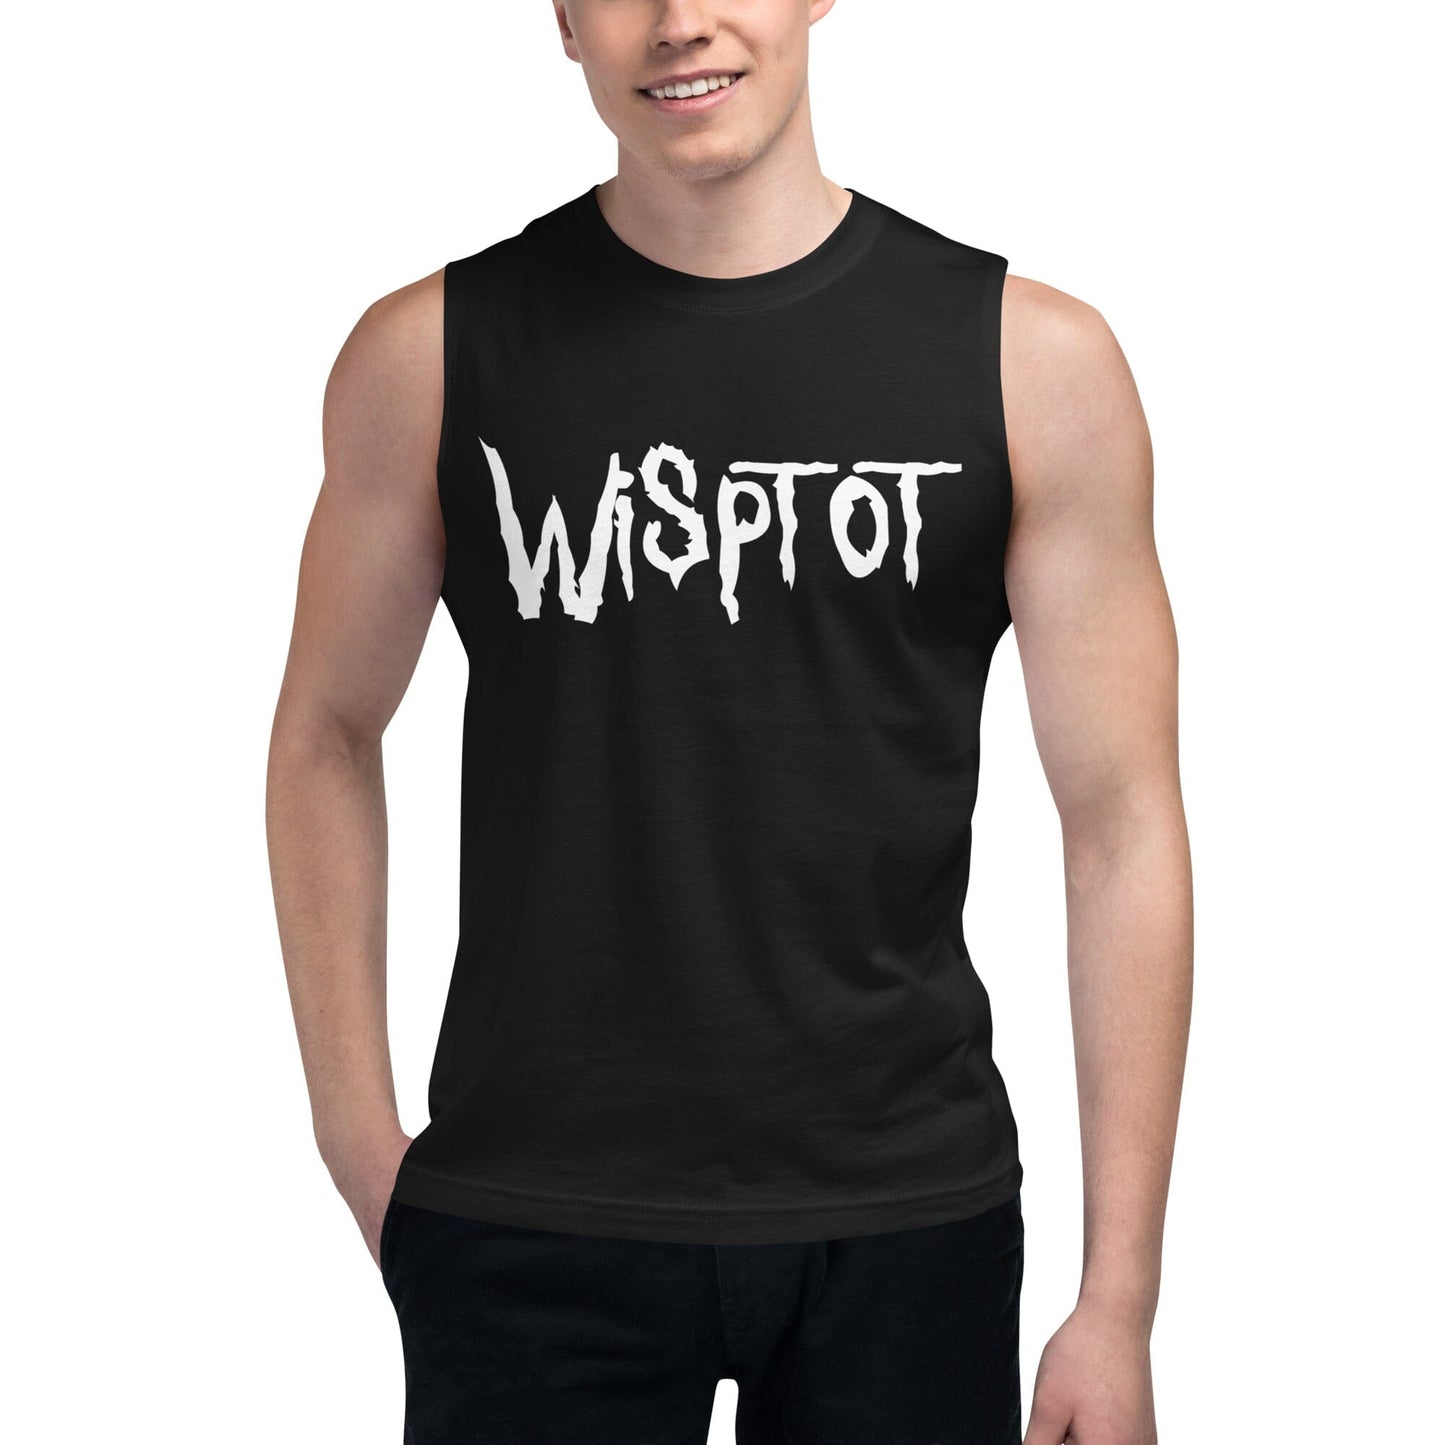 BLACK WispTot Muscle Shirt [Unfoiled] (All net proceeds go to equally to Kitty CrusAIDe and Rags to Riches Animal Rescue) JoyousJoyfulJoyness S 